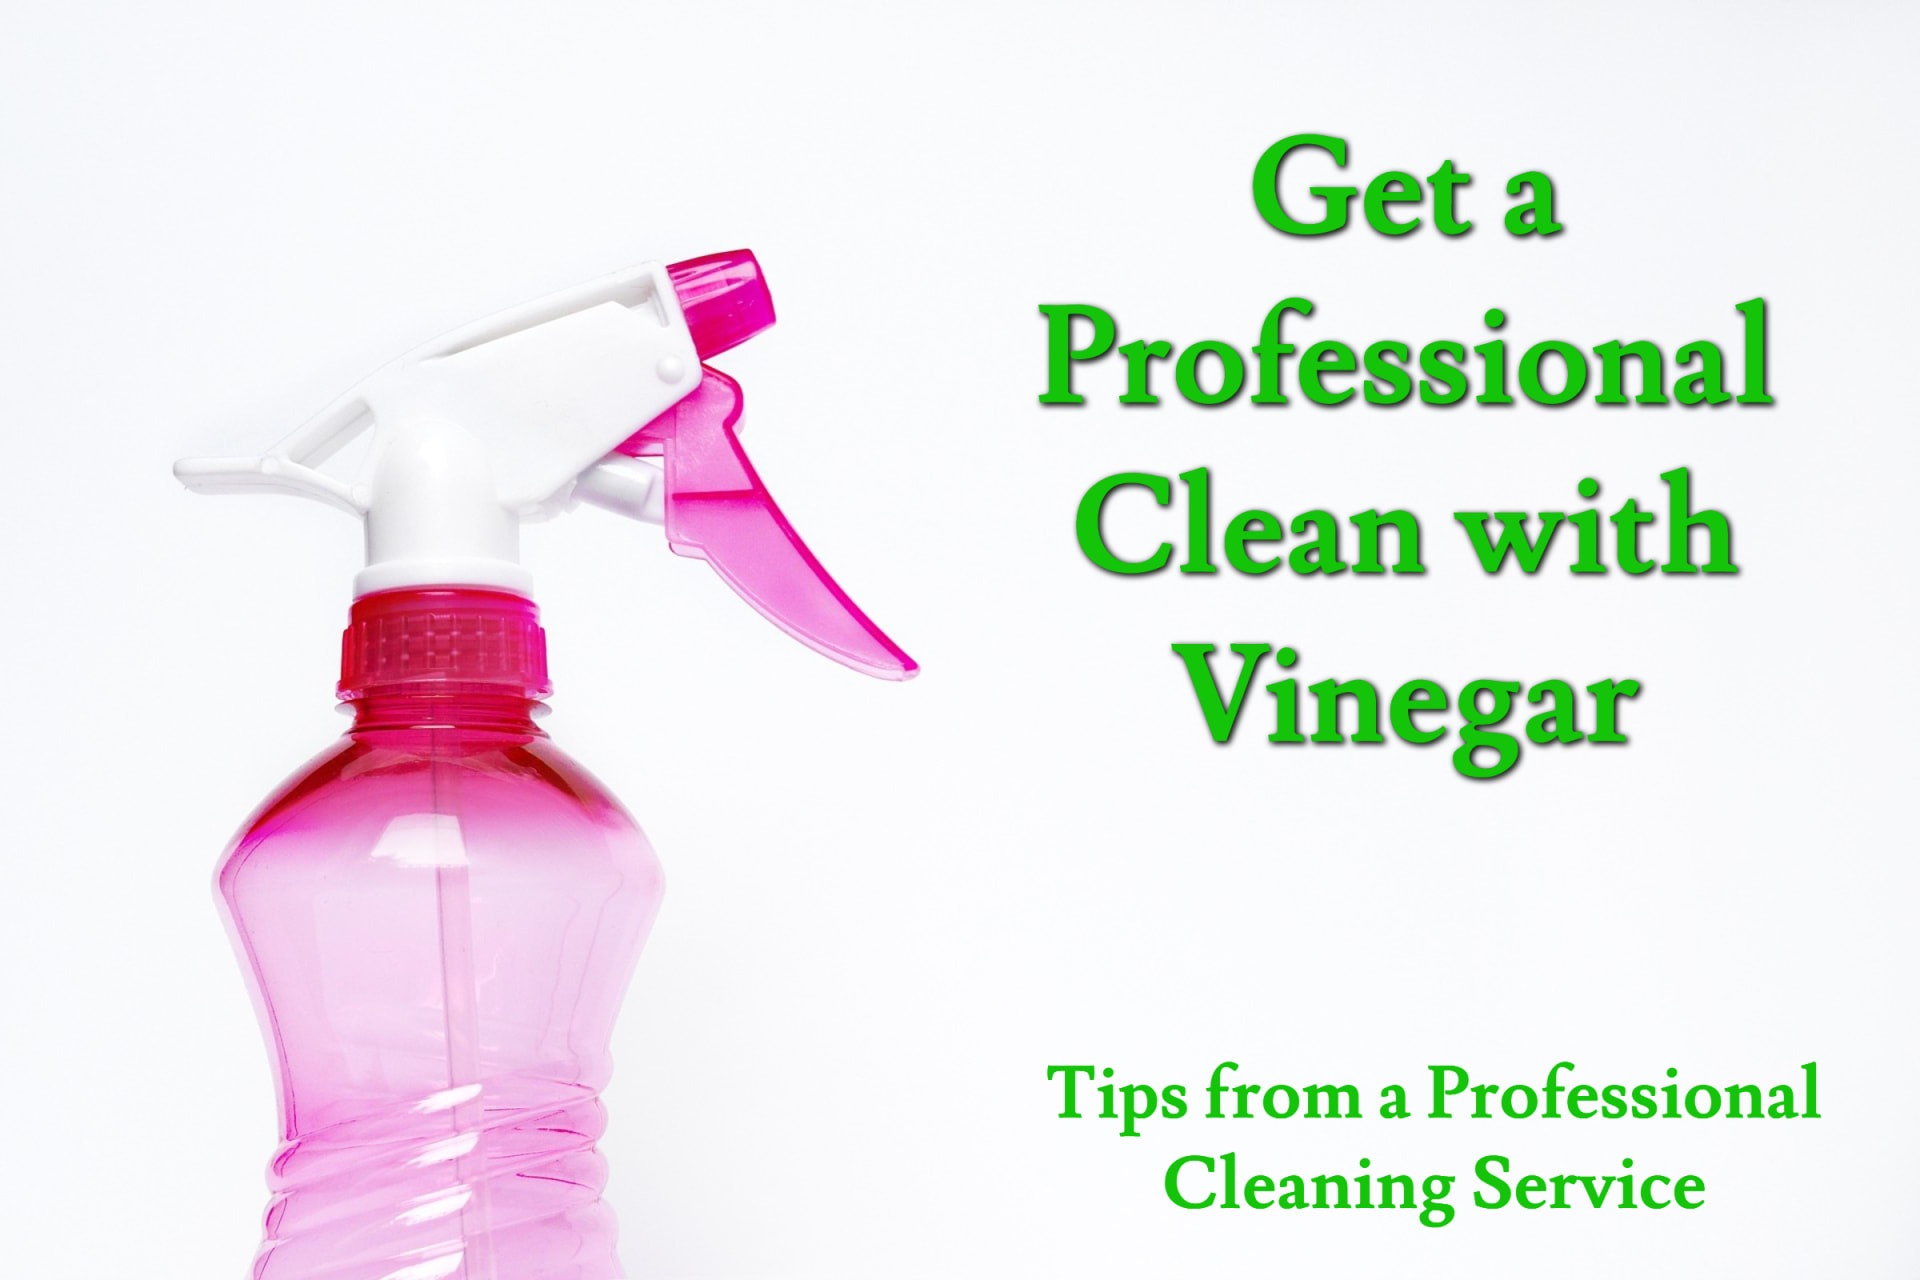 Vinegar Cleaning Tips from a Professional Cleaning Service